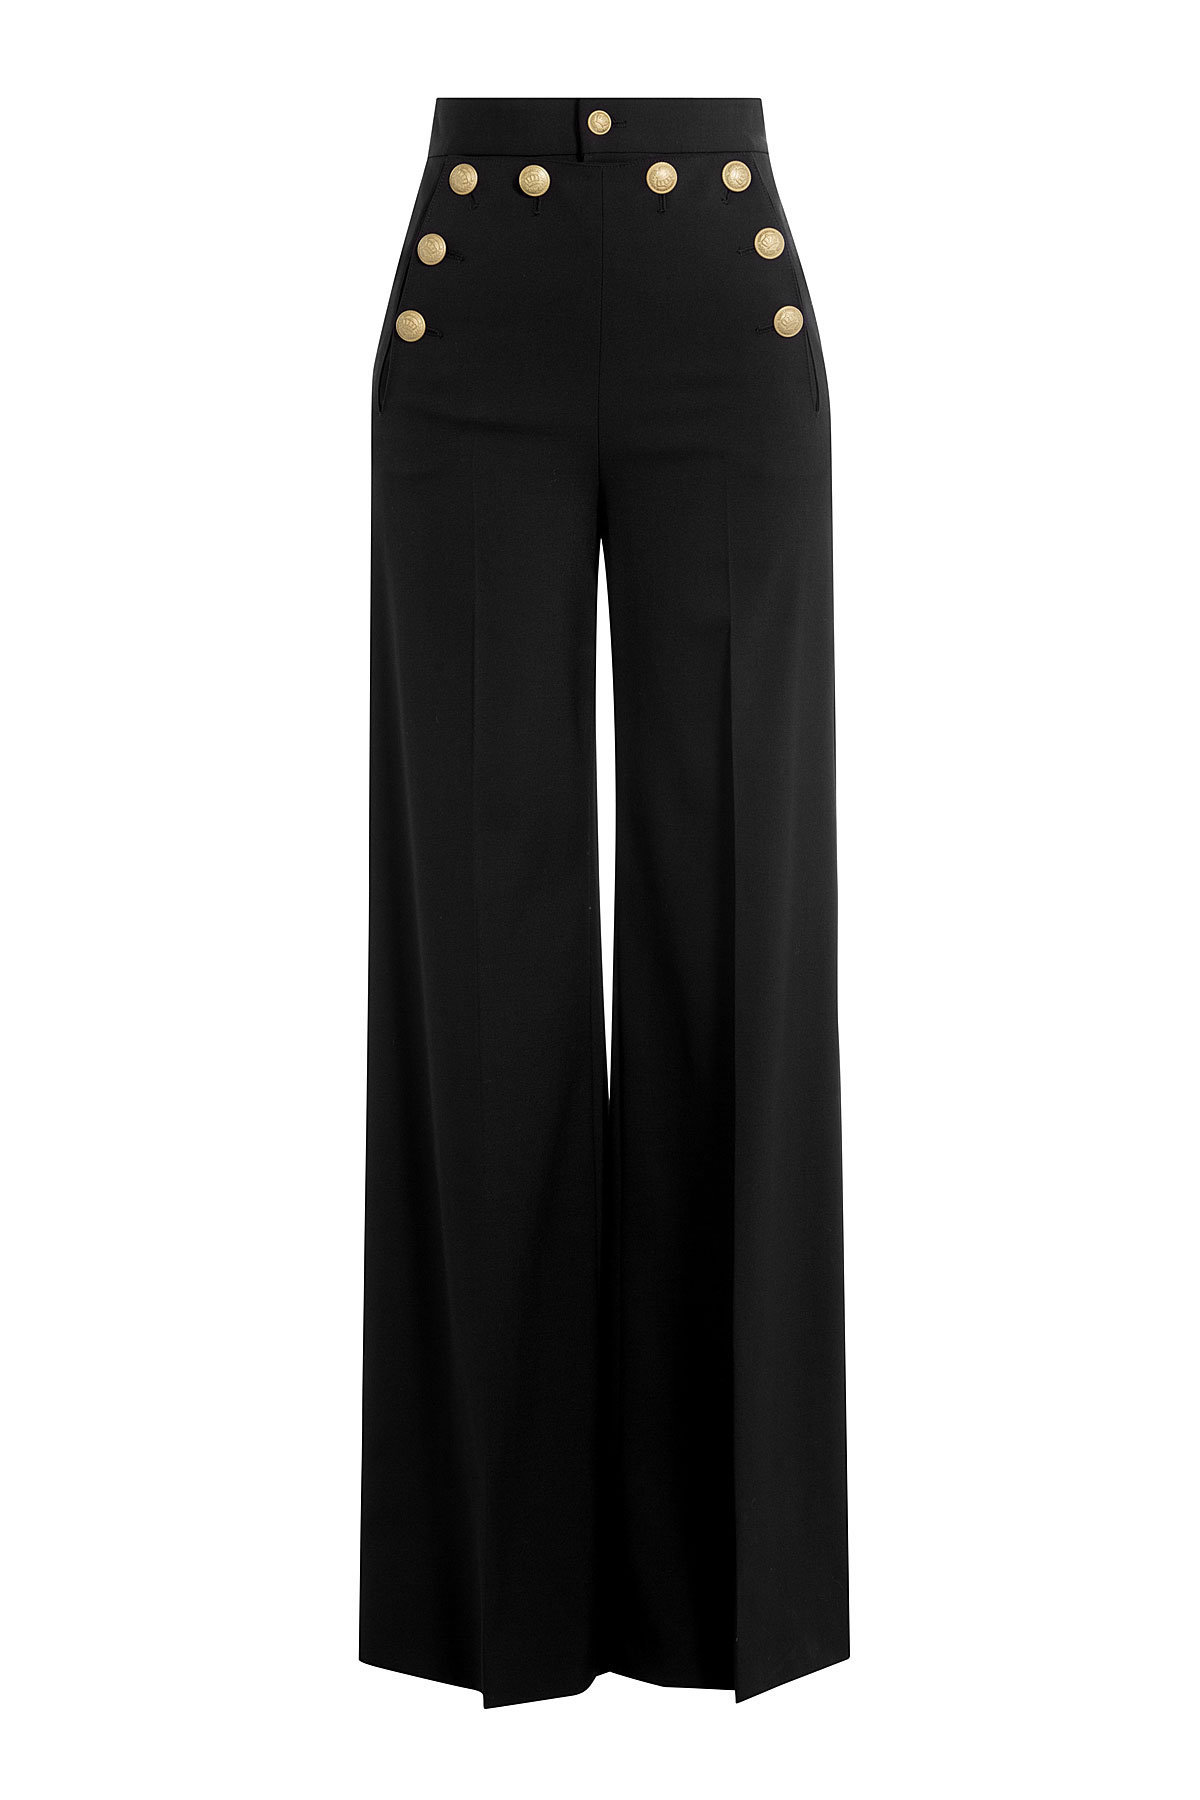 Red Valentino - Wide Leg Sailor-Style Pants